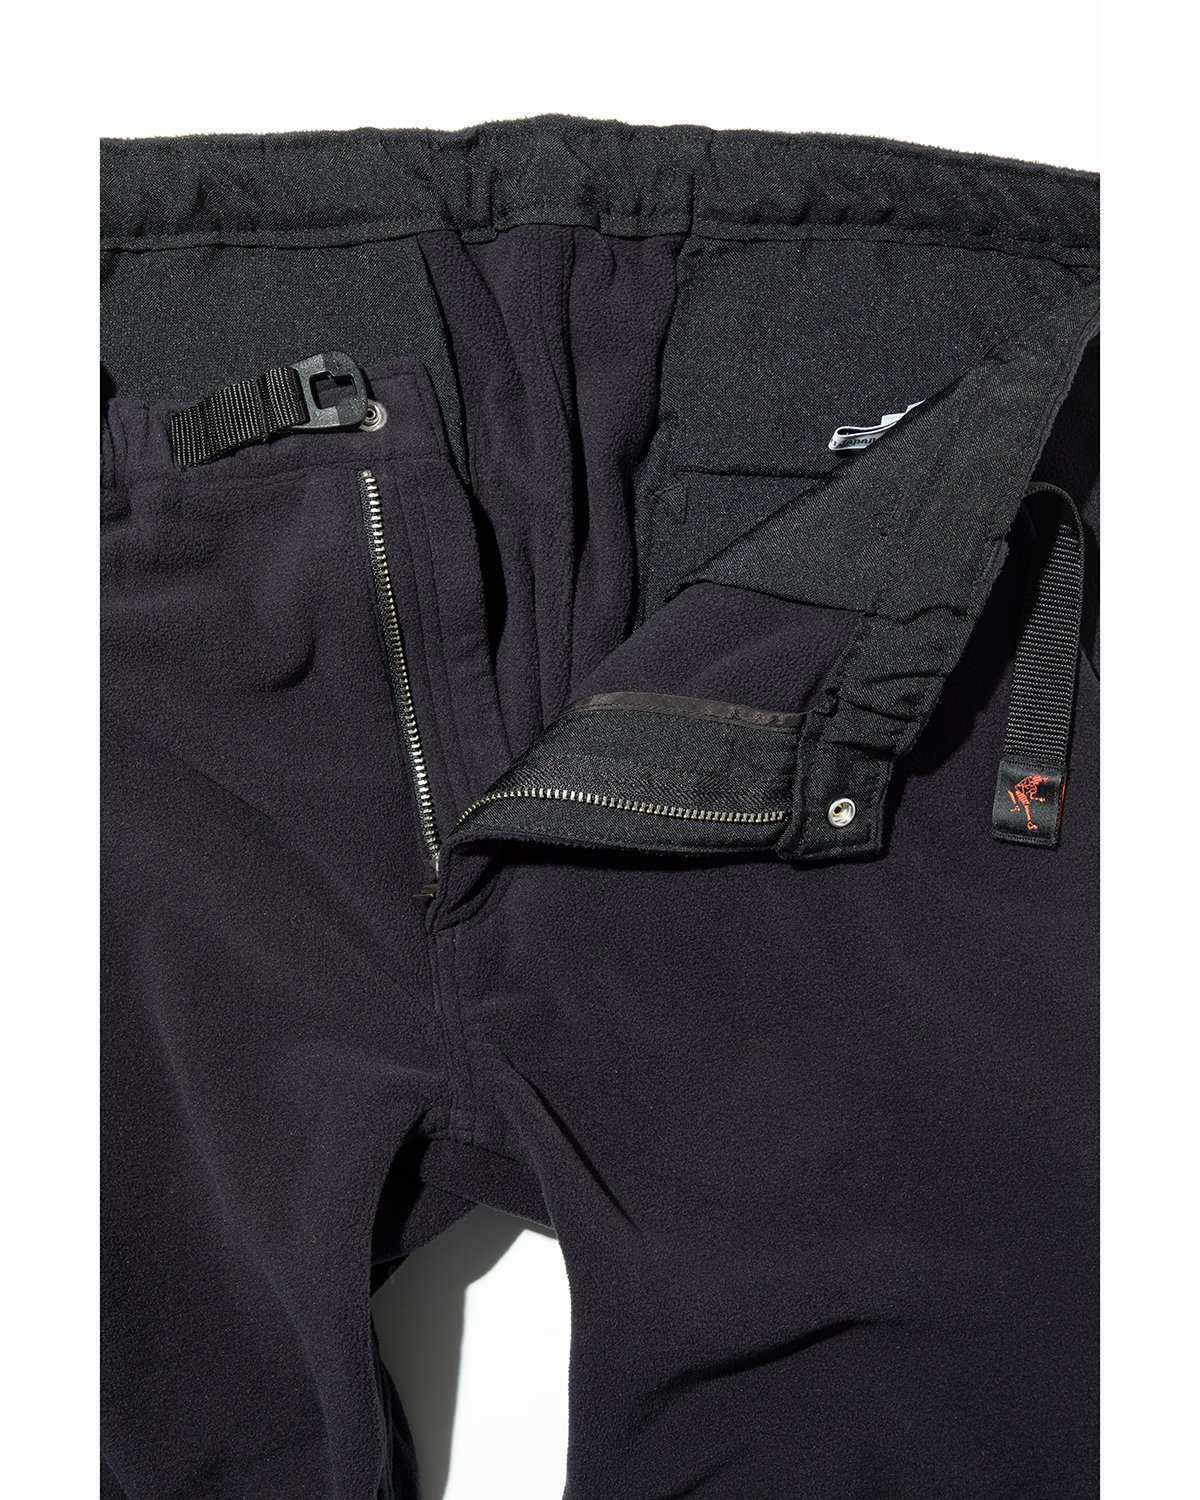 nonnative and Gramicci Rework the Climber Easy Pants Using 